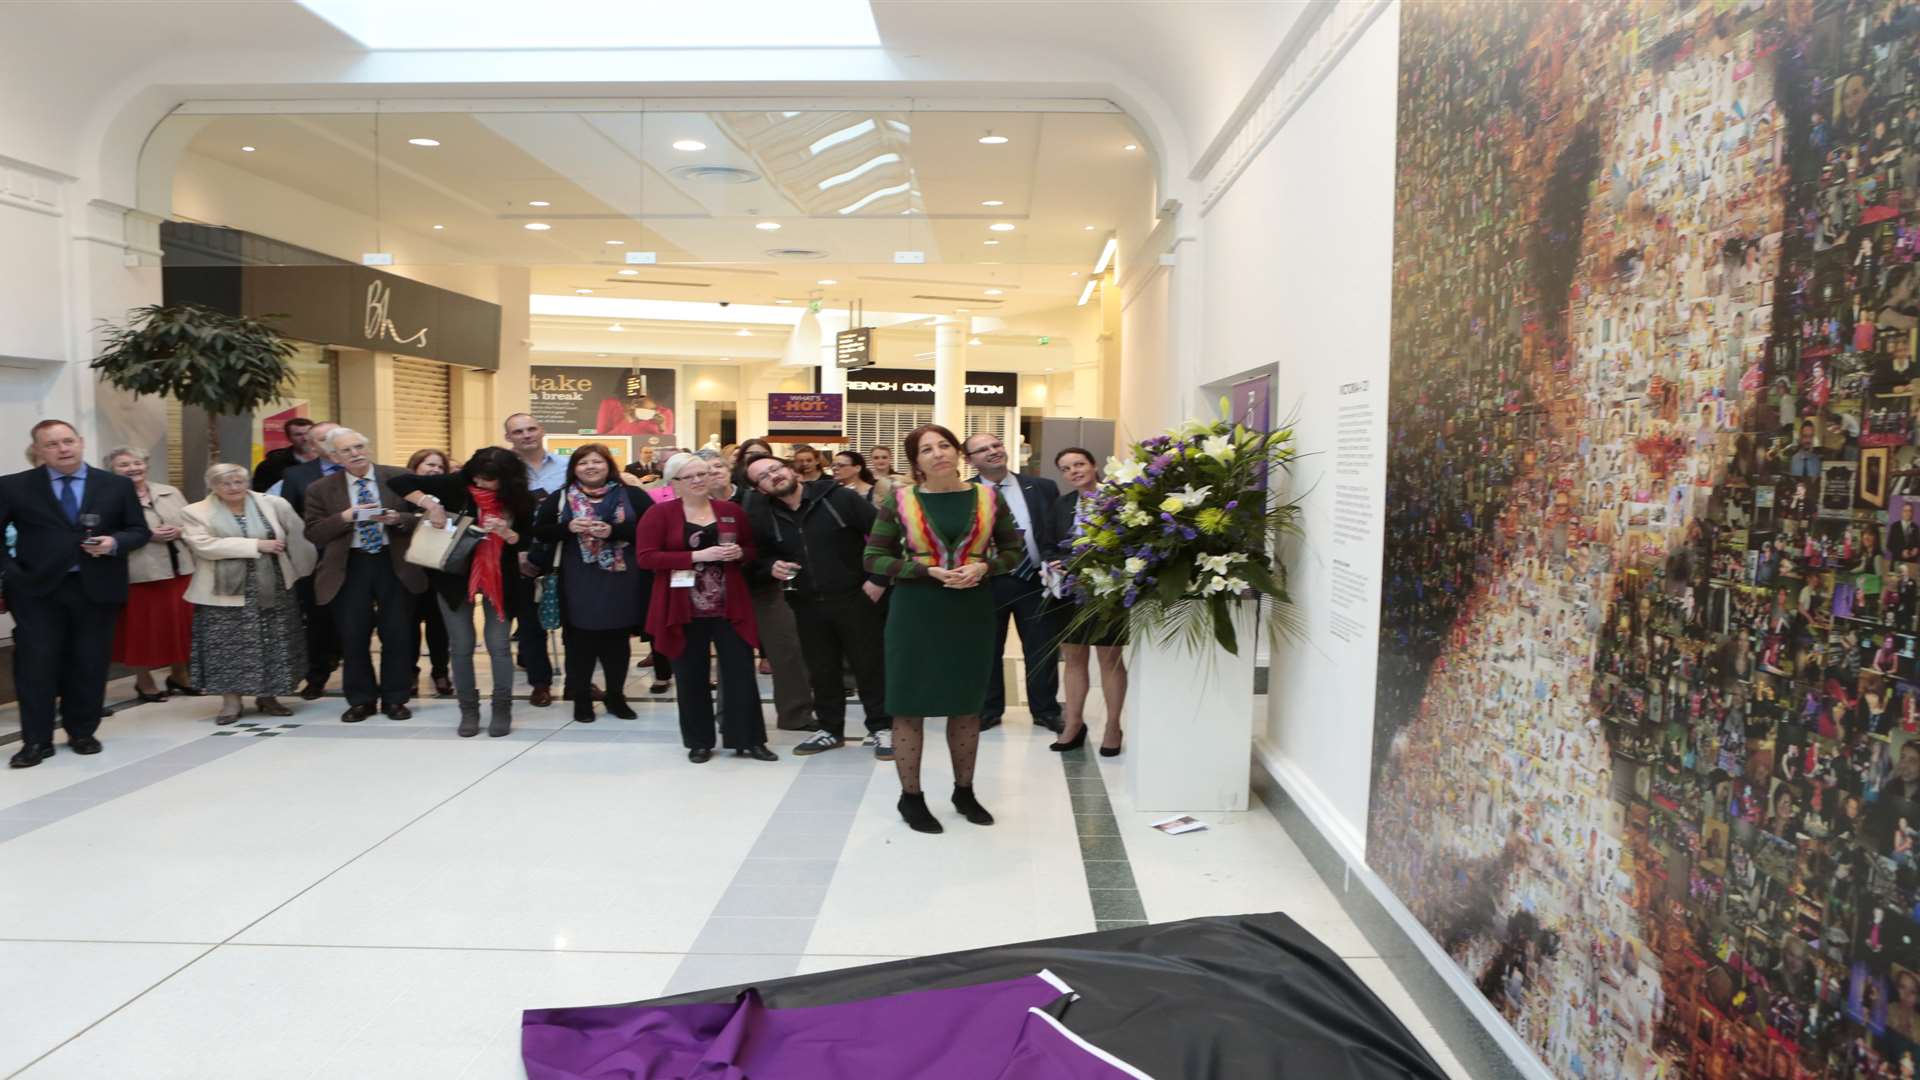 The unveiling of community art project VictoriaAt21 by artist Helen Marshall